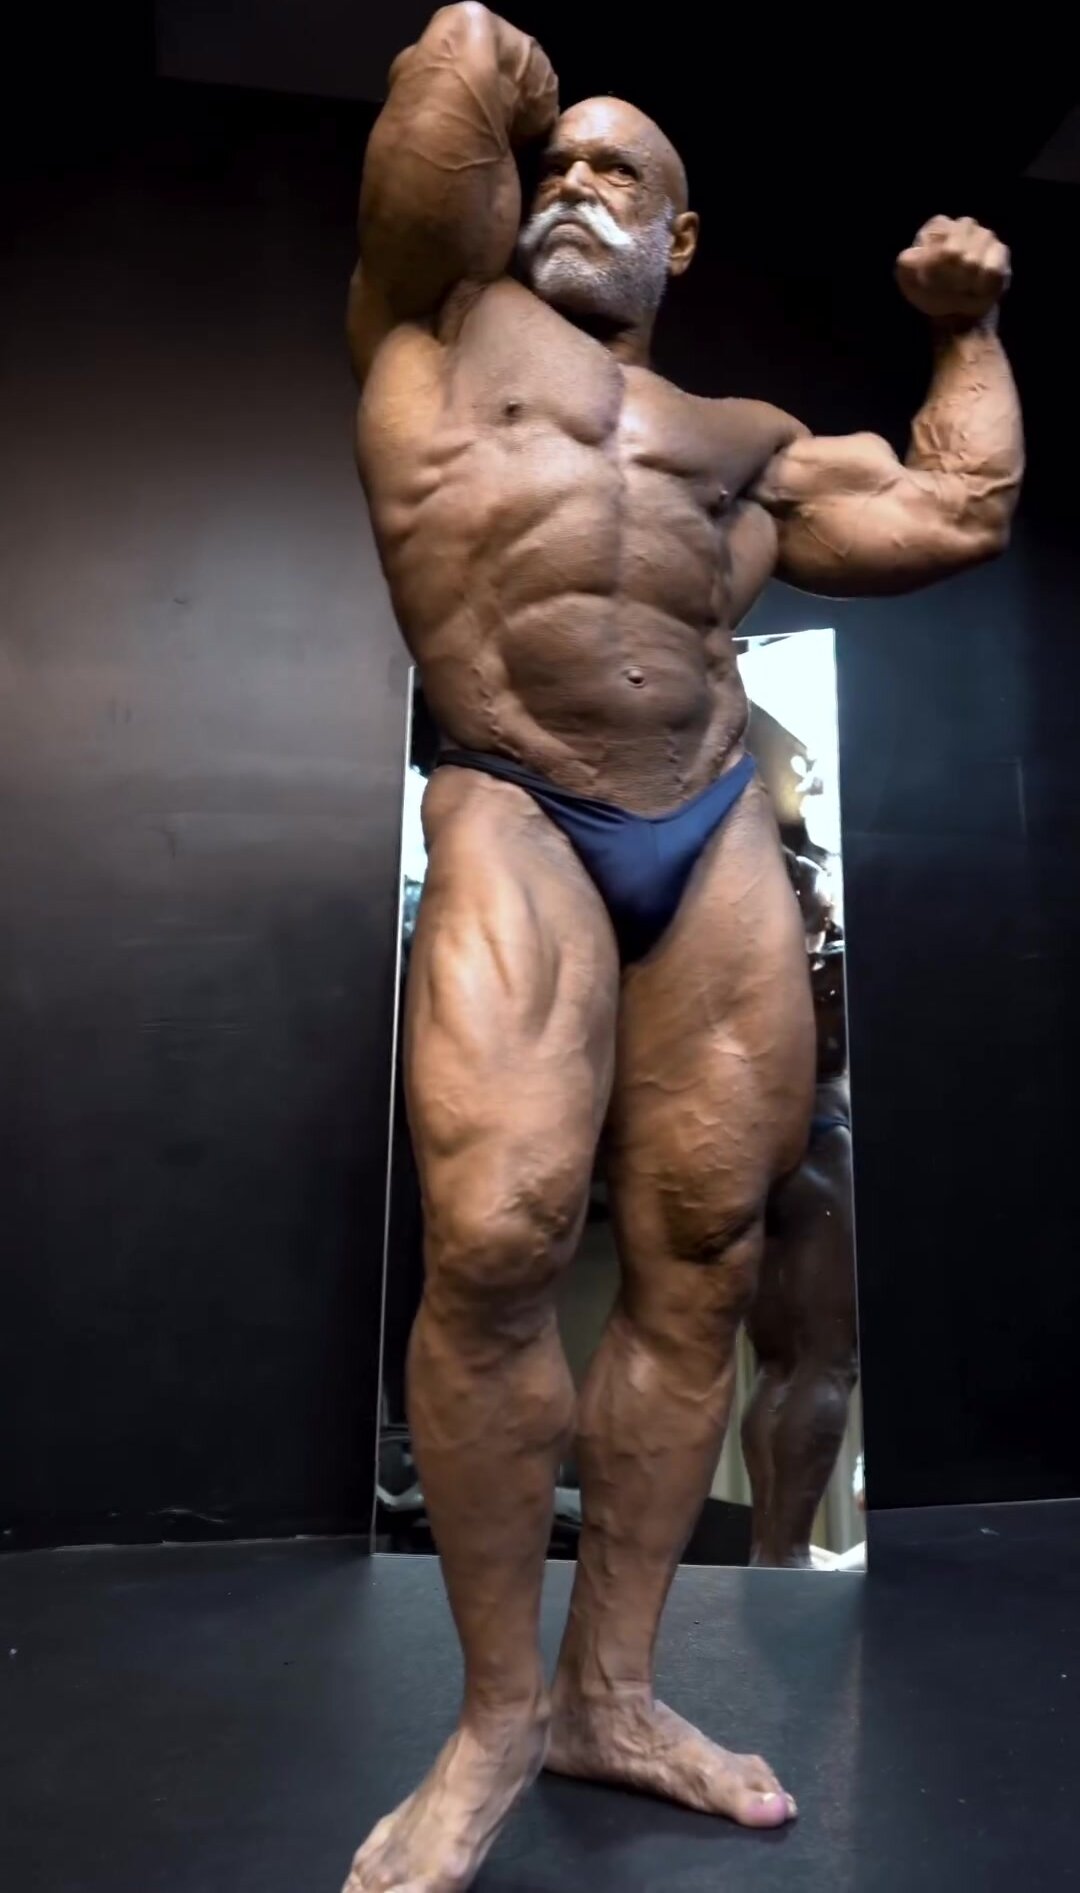 This Muscledaddy doesn't age